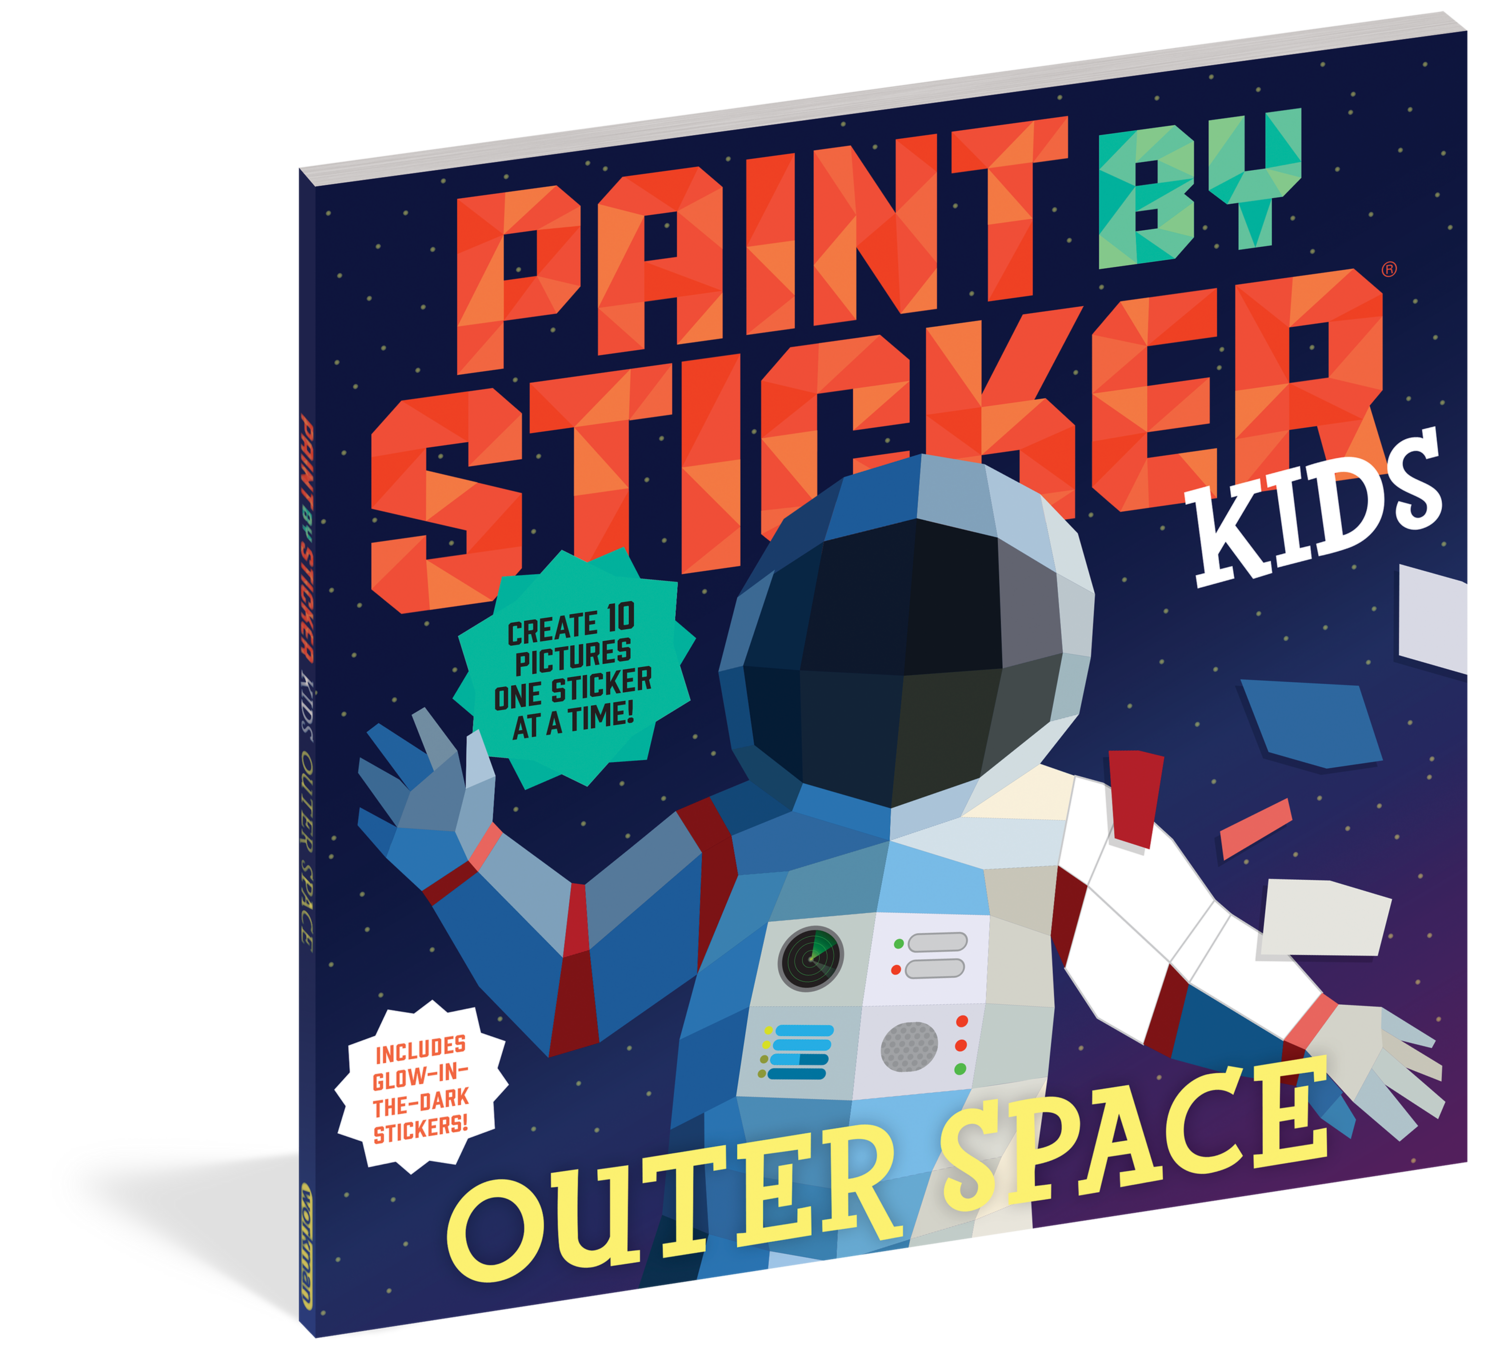 Paint By Sticker Kids Outer Space